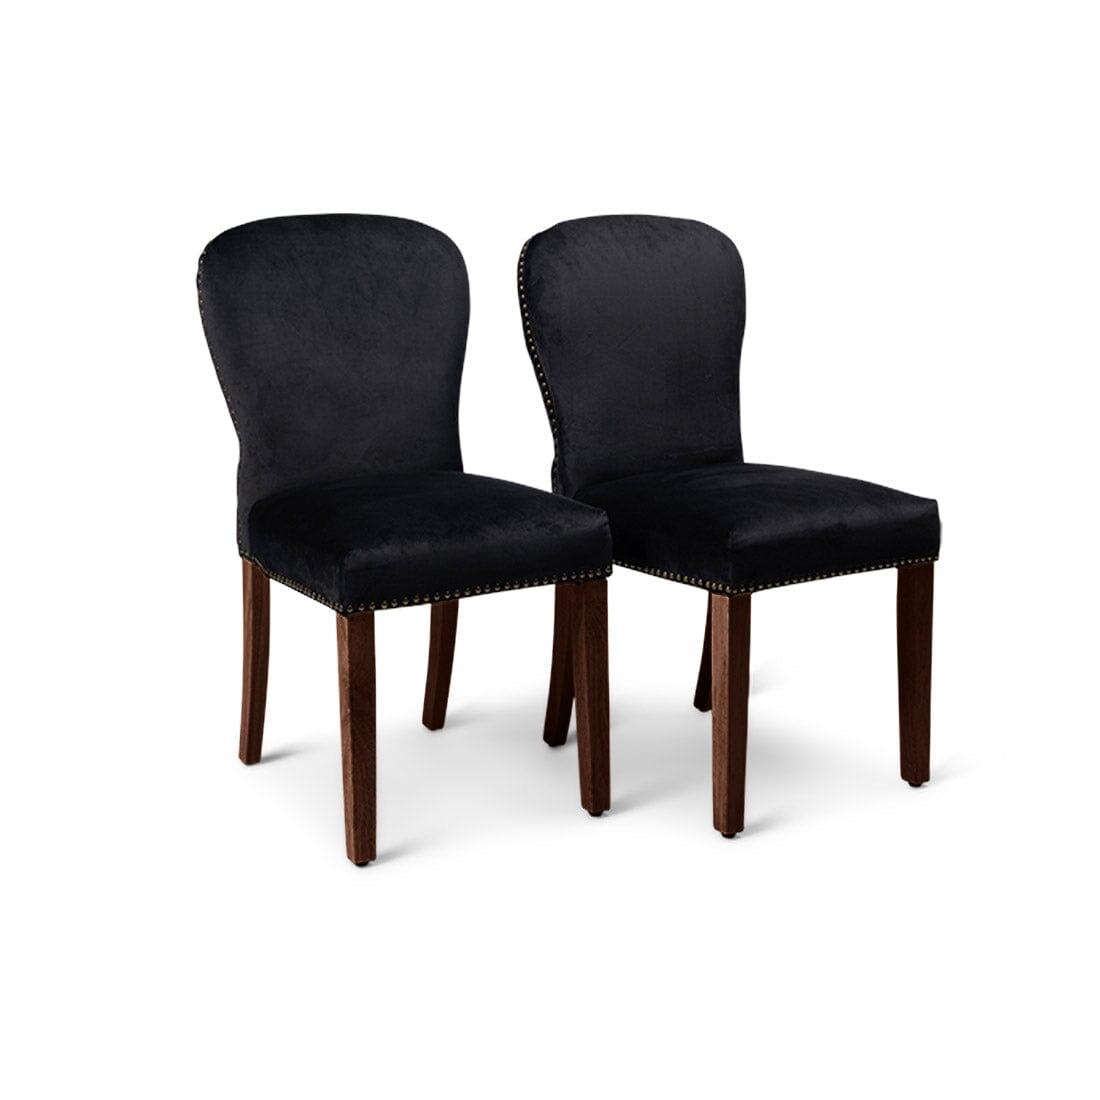 Edward dining chairs - set of 2 - black and dark wood - Laura James